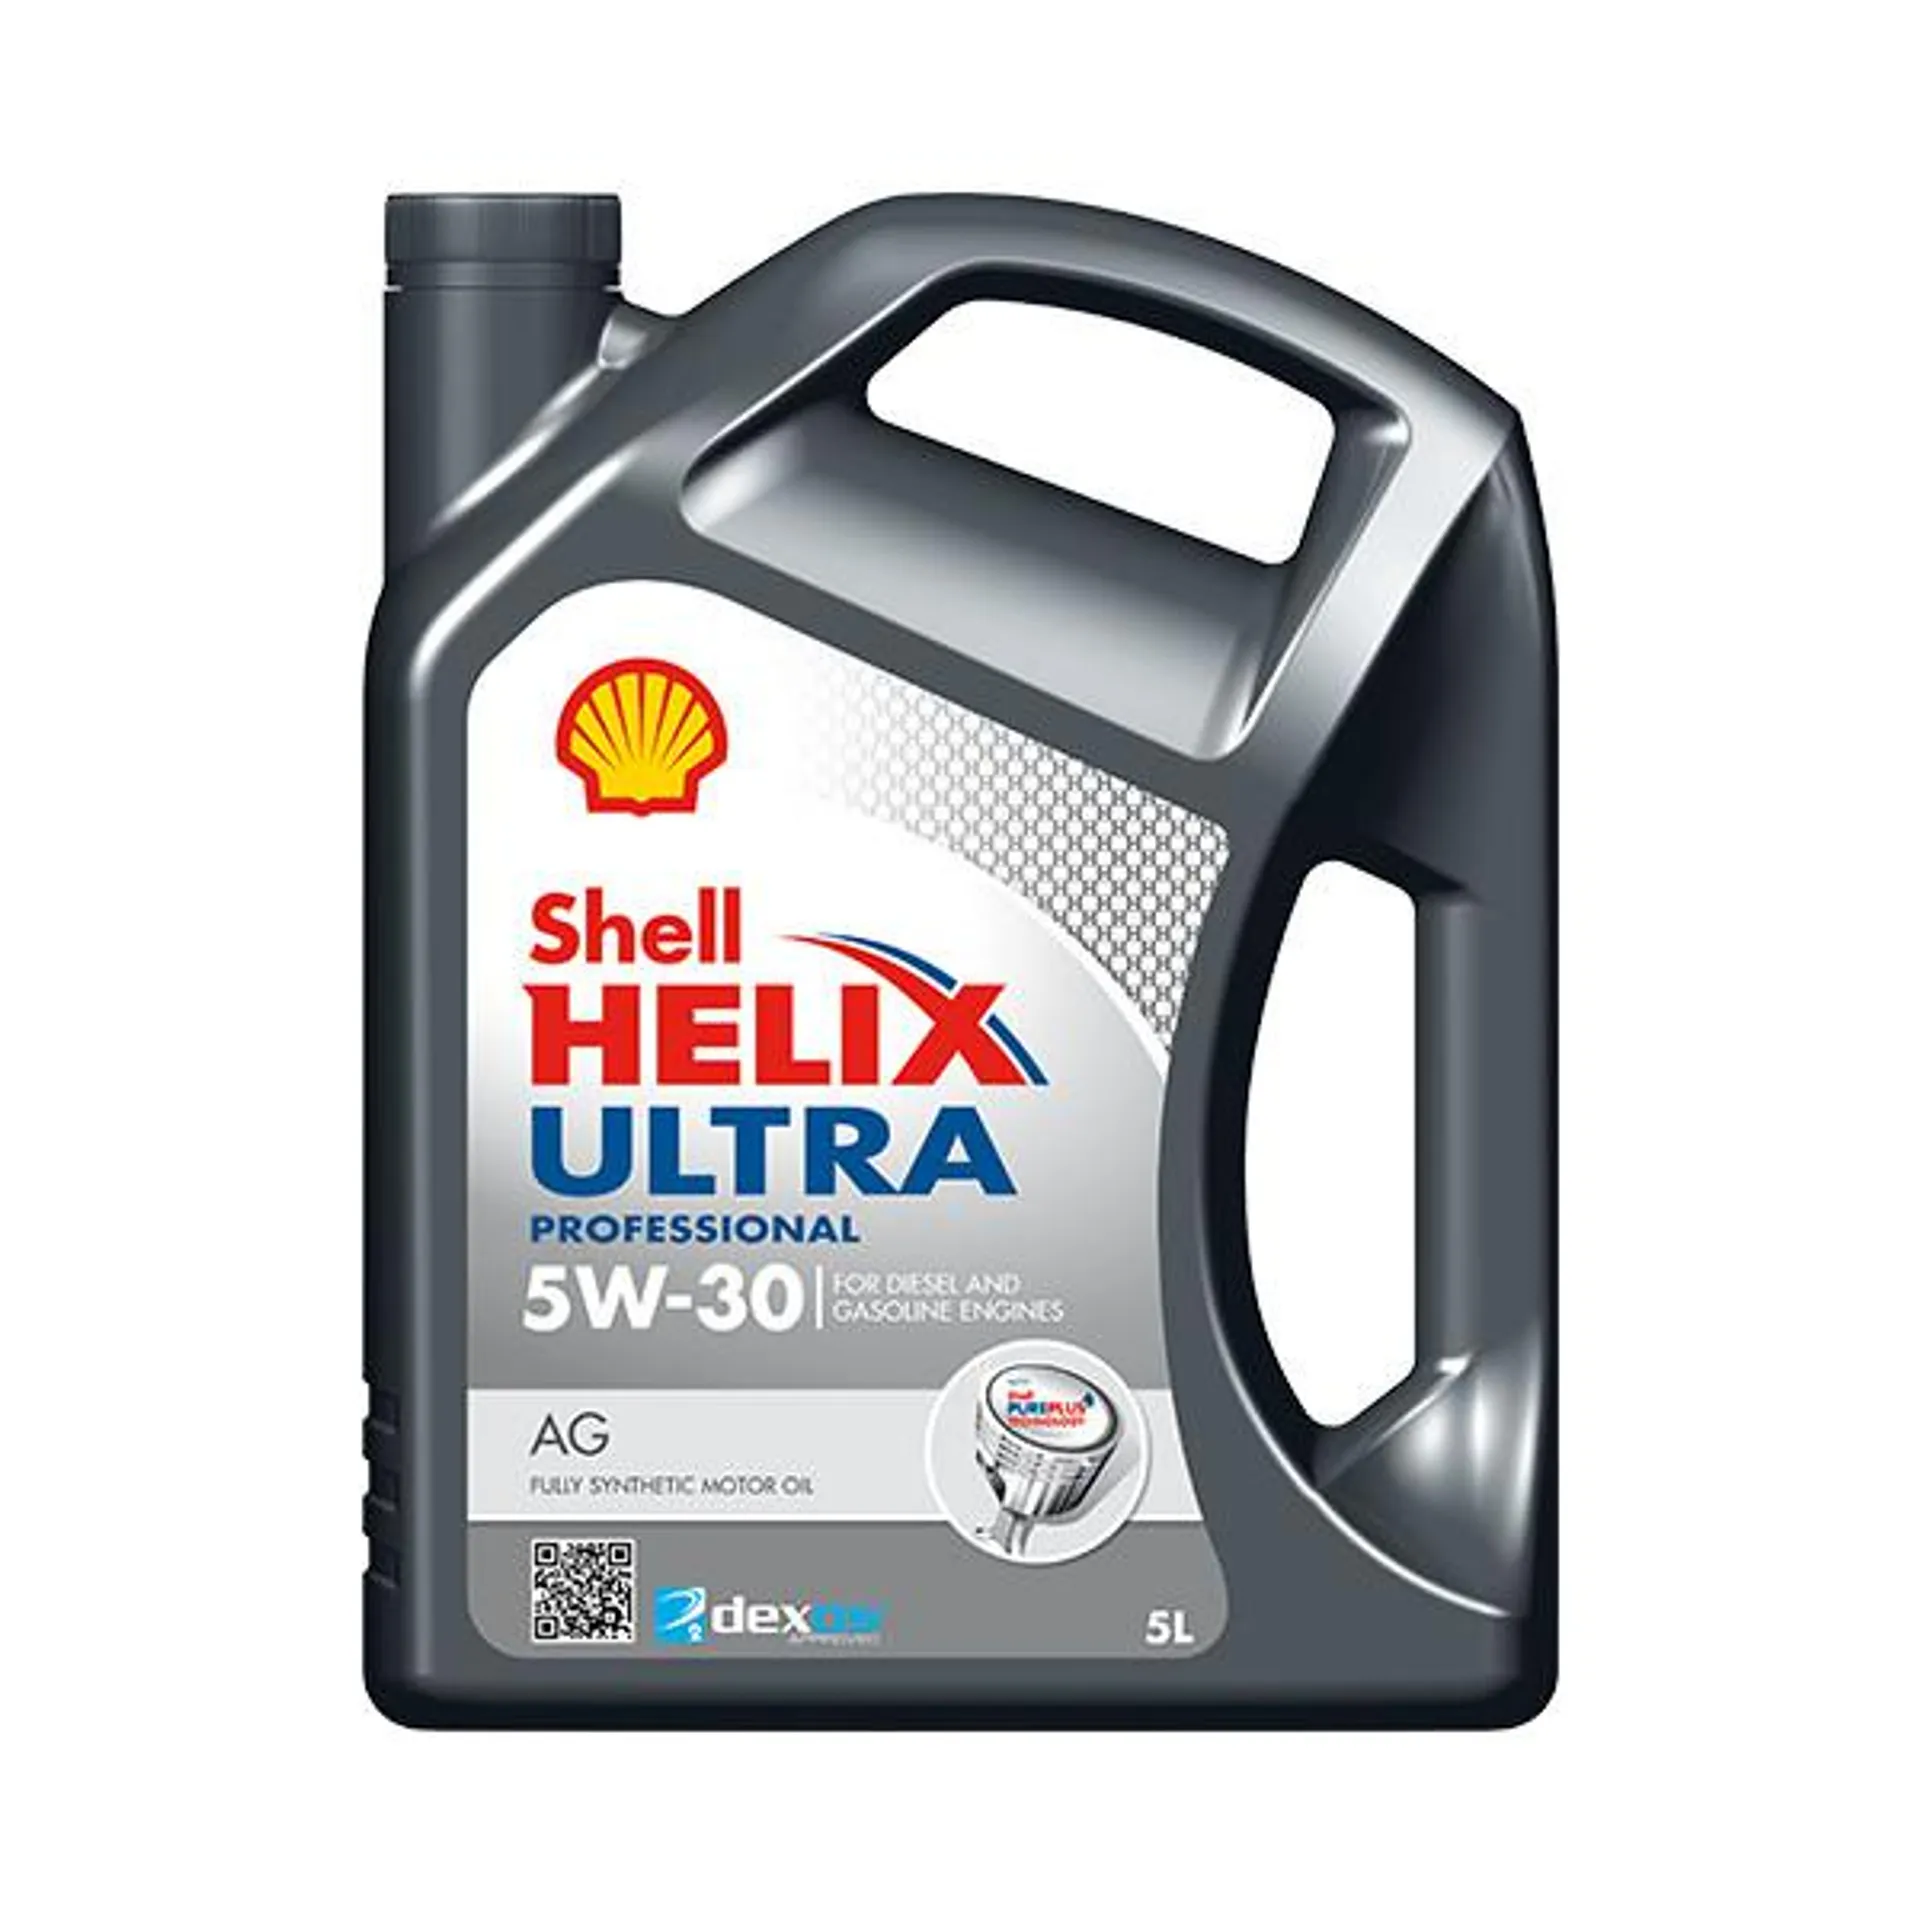 Shell Helix Ultra Professional AG Engine Oil - 5W-30 - 5Ltr